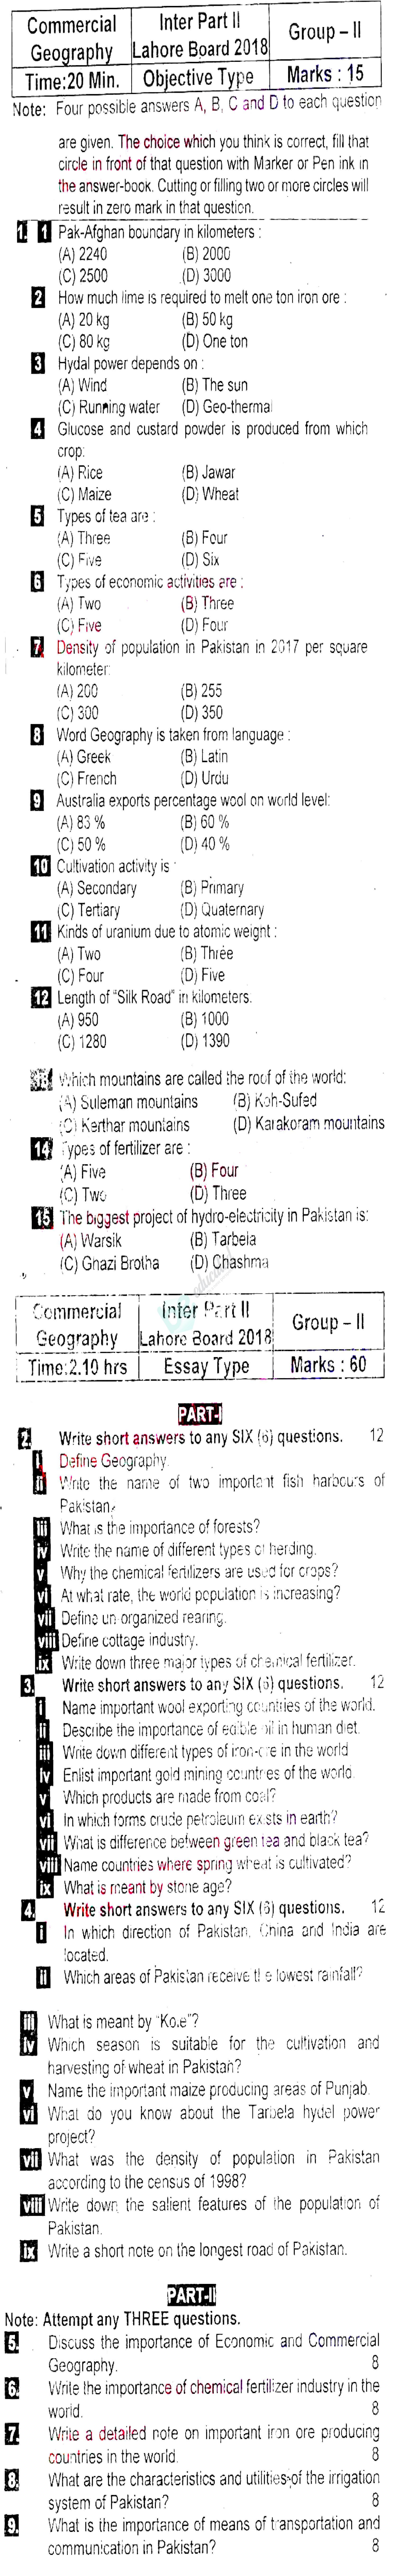 Commercial Geography ICOM Part 2 Past Paper Group 2 BISE Lahore 2018